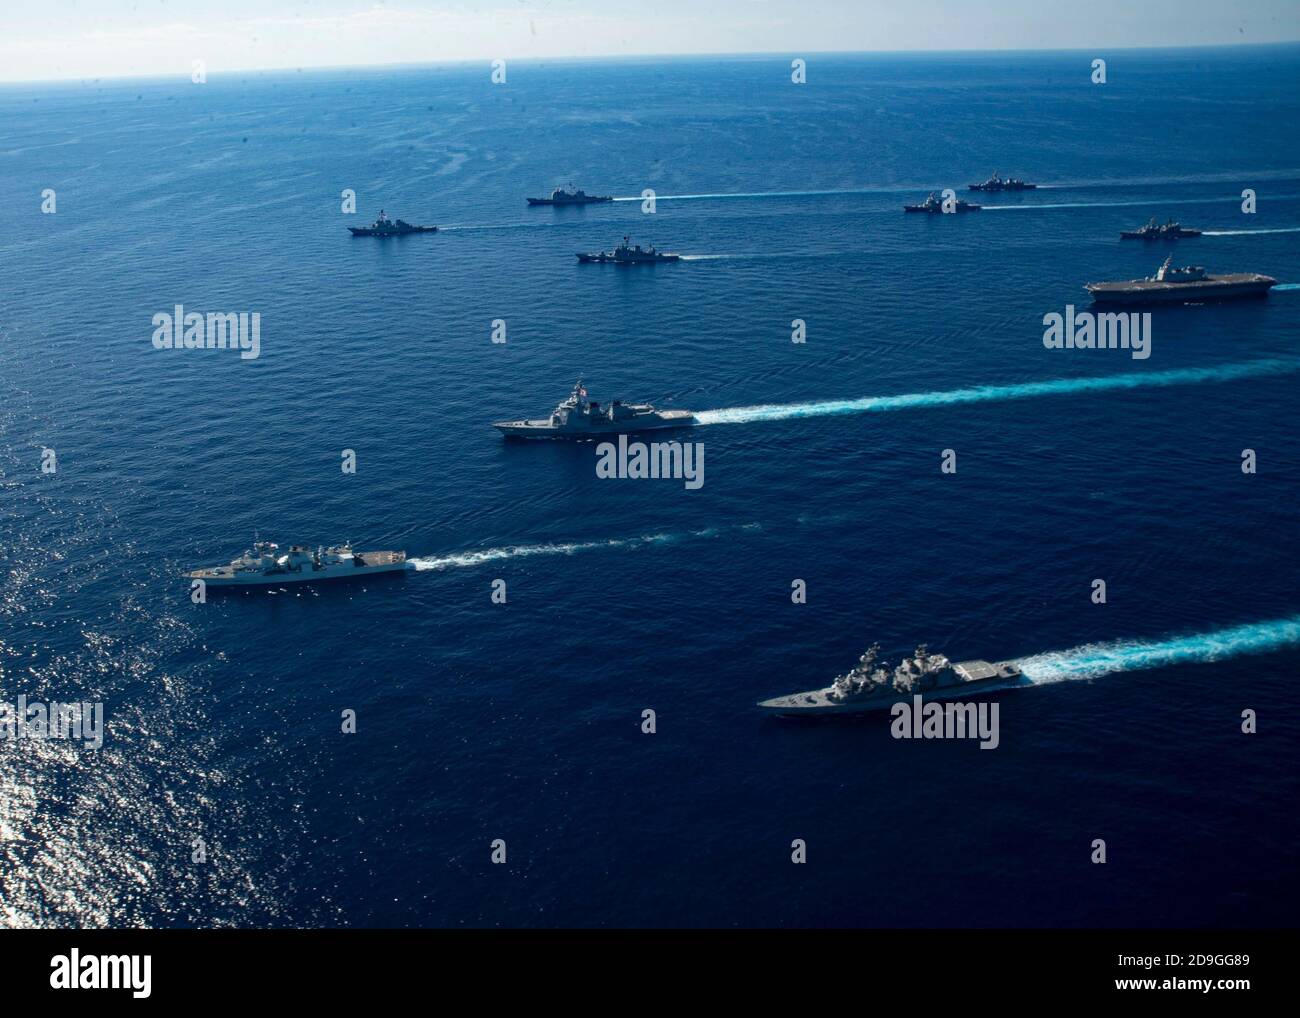 U.S. Navy ships assigned to the Ronald Reagan Carrier Strike Group joined ships of Japan Maritime Self-Defense Force sail in formation during exercise Keen Sword 21 October 26, 2020 in the Philippine Sea. Stock Photo